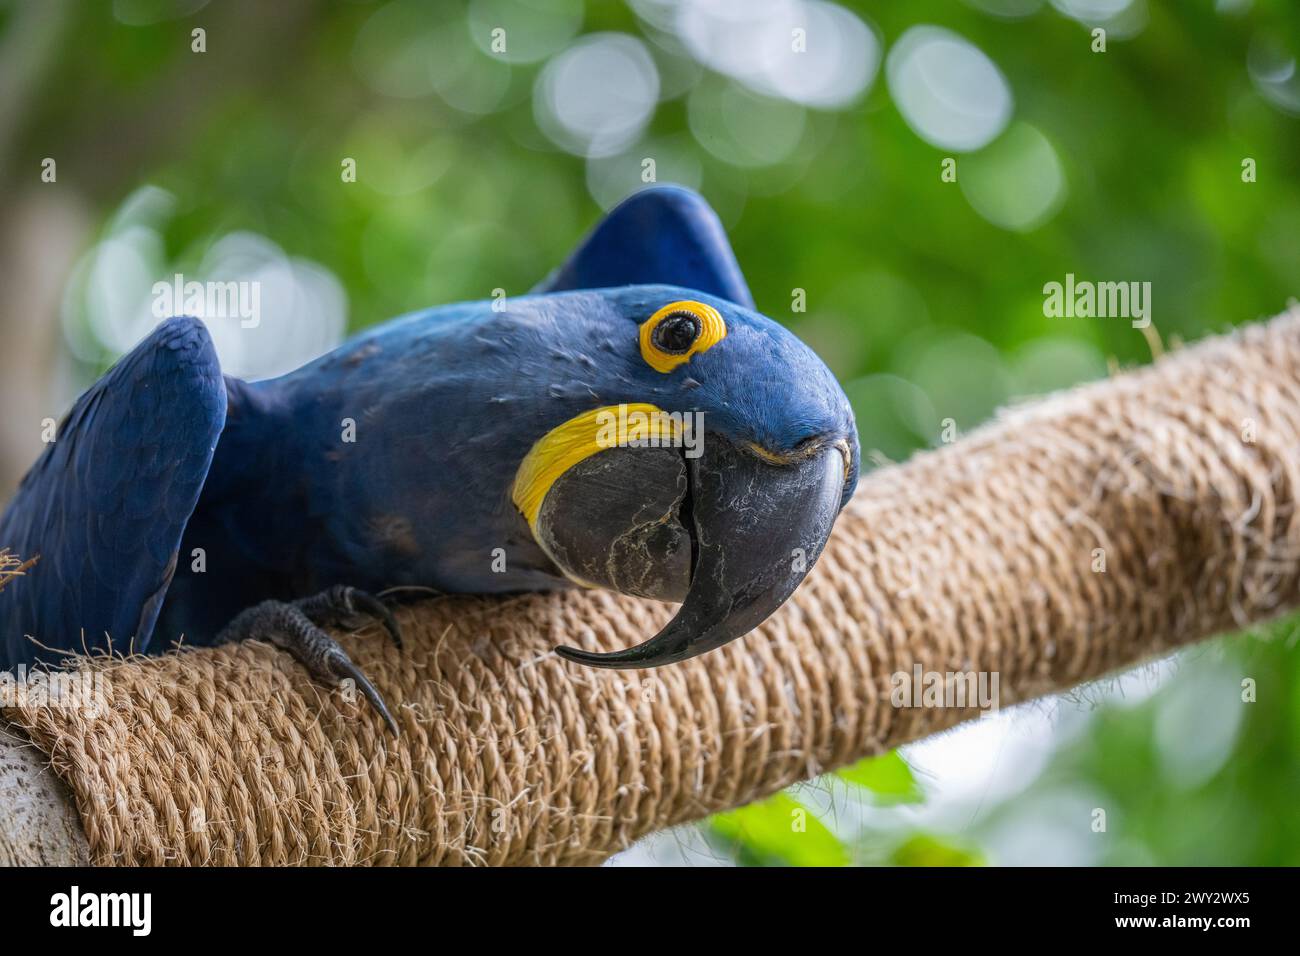 Close-up of Bright Blue Macaw with yellow eyes in Aviary Stock Photo